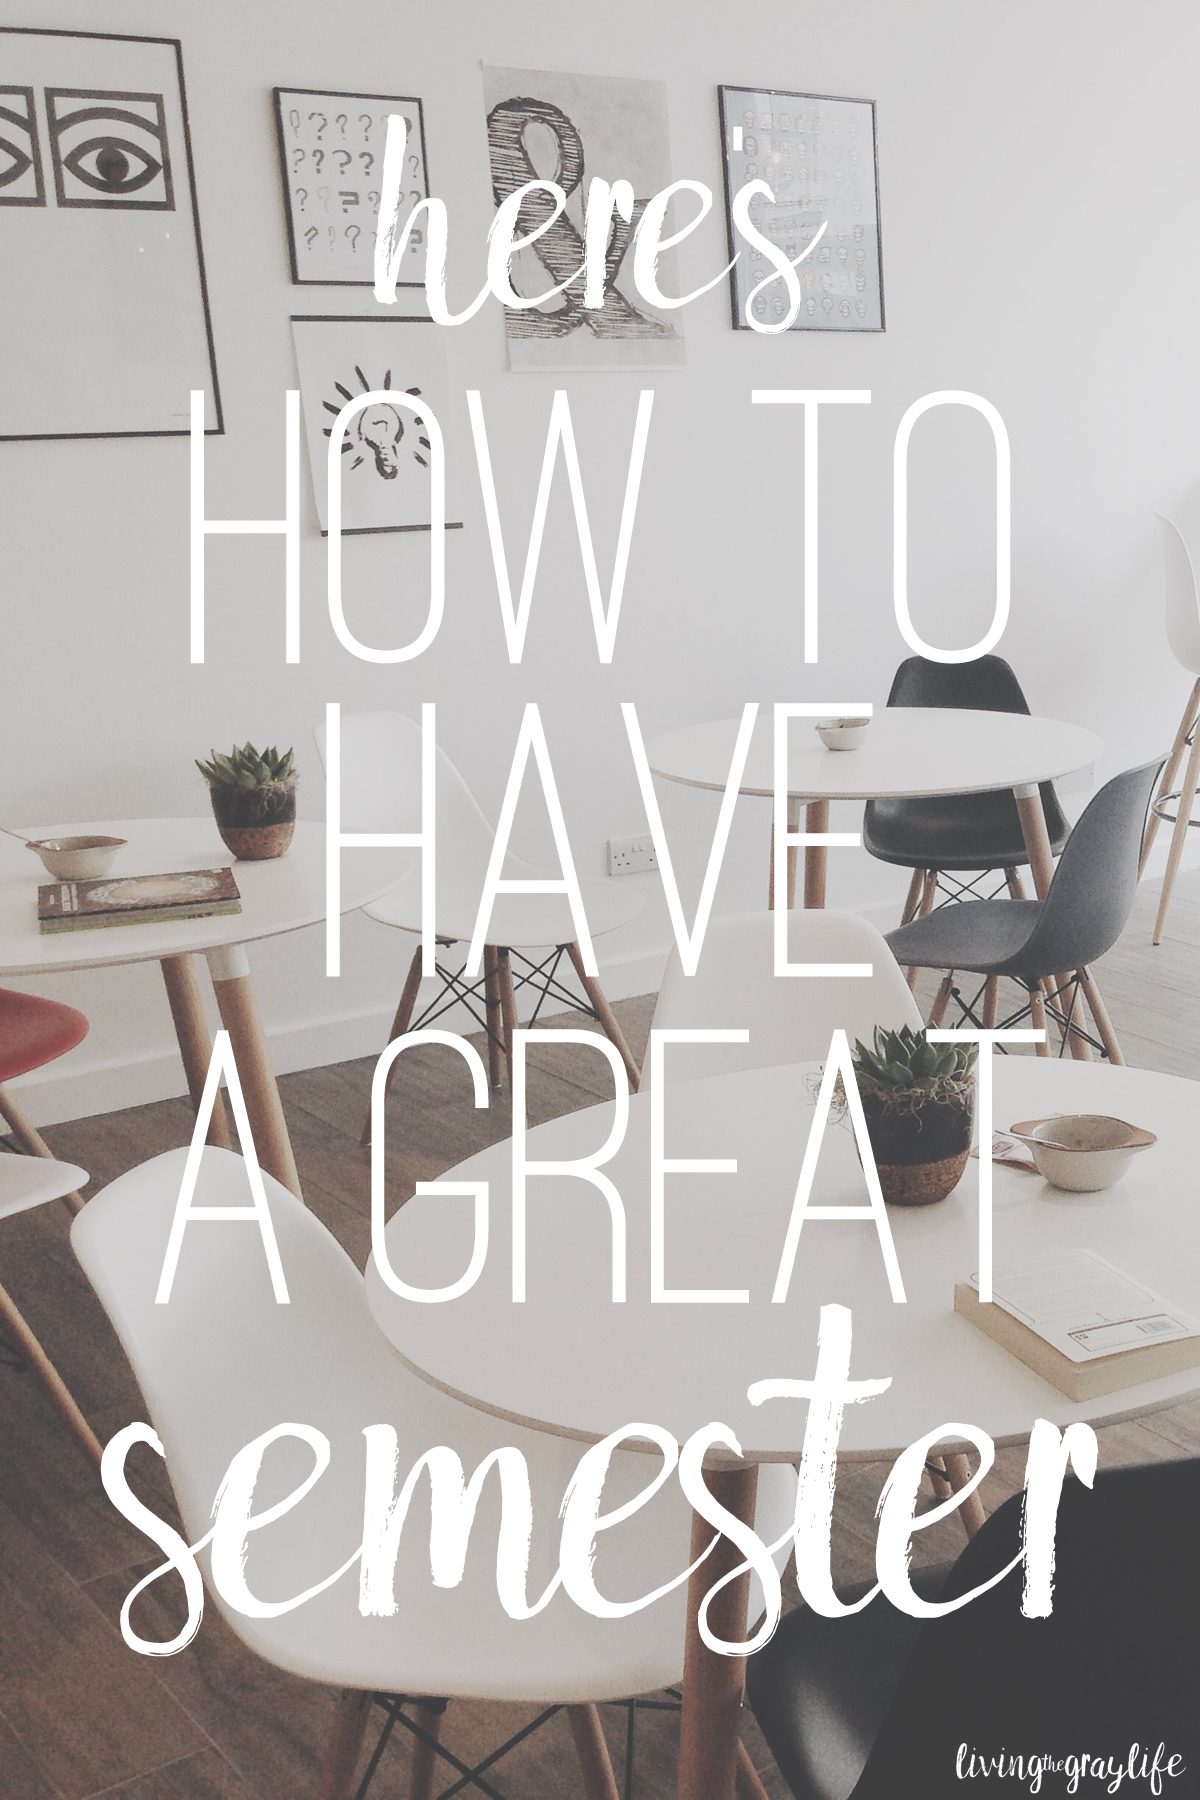 Here's How to Have a Great Semester | Tips & Tricks for Succeeding in College